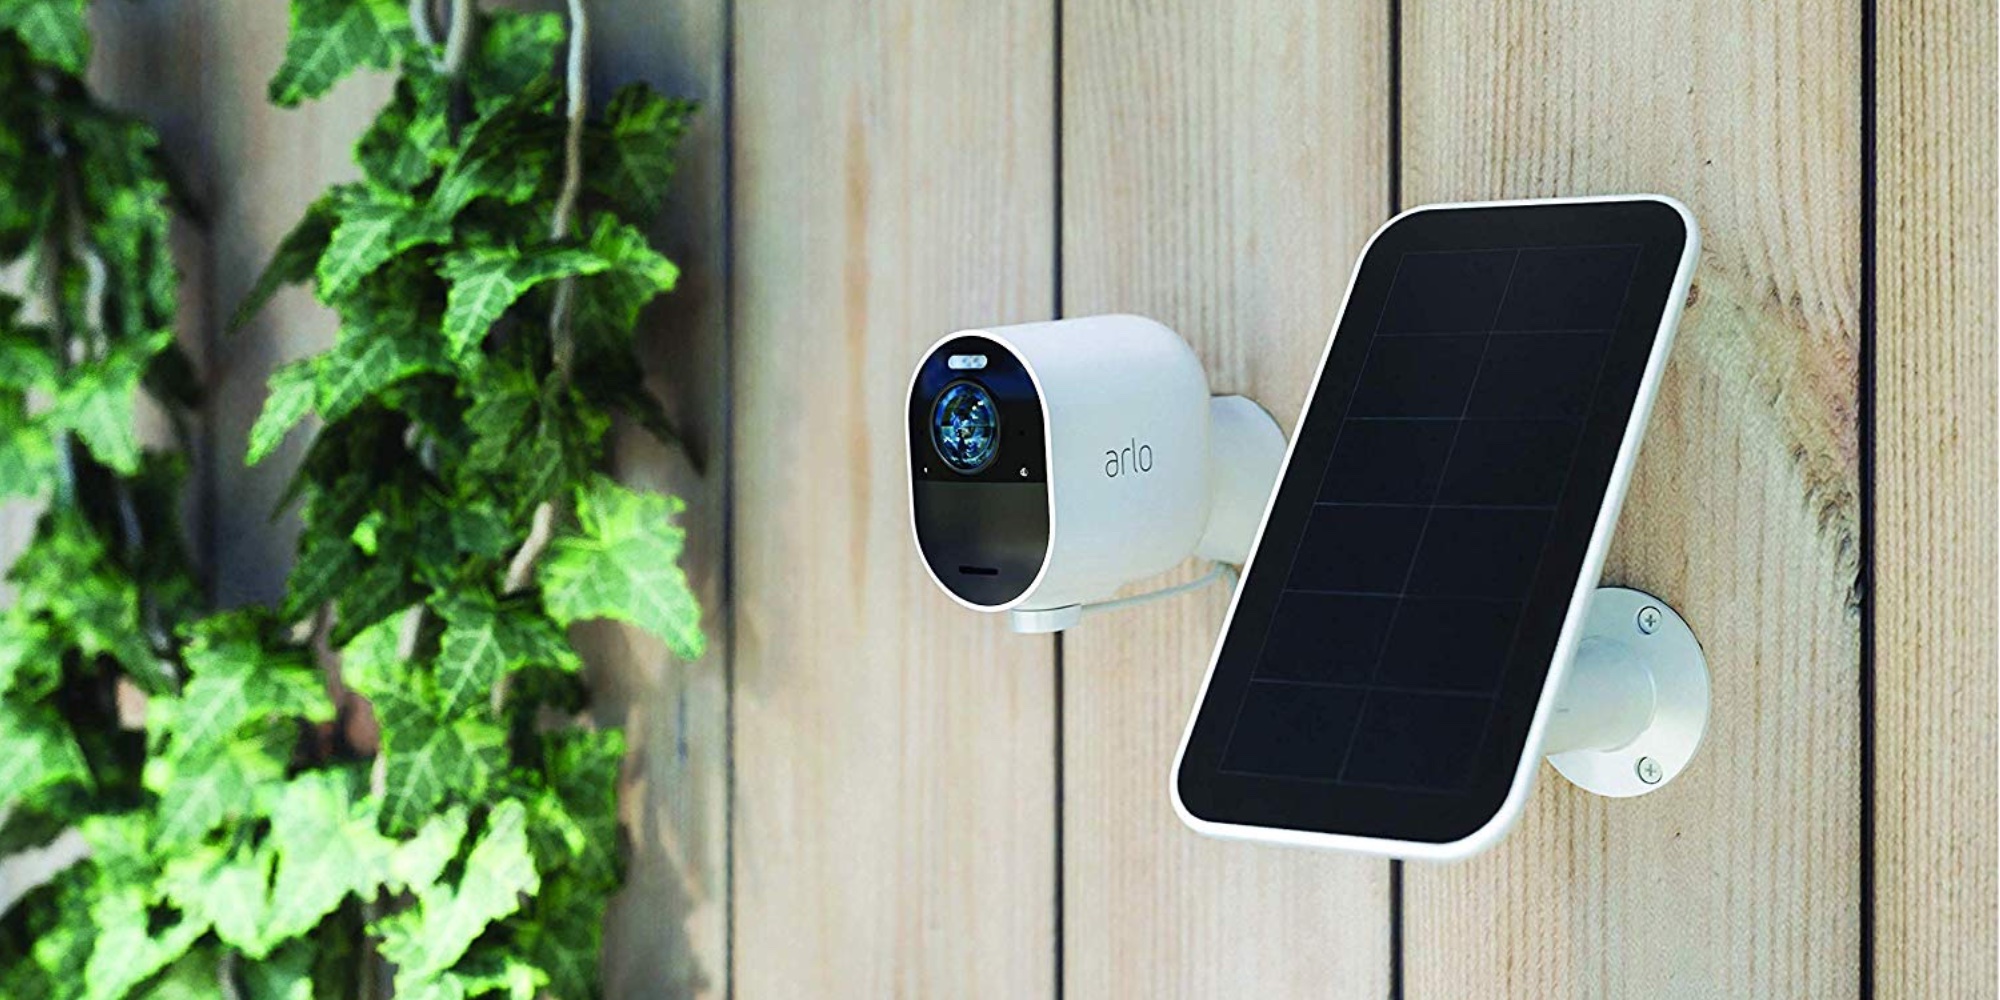 Arlo Camera Solar Panel hits new Amazon low at 64 (Reg. 80), more from 40 9to5Toys